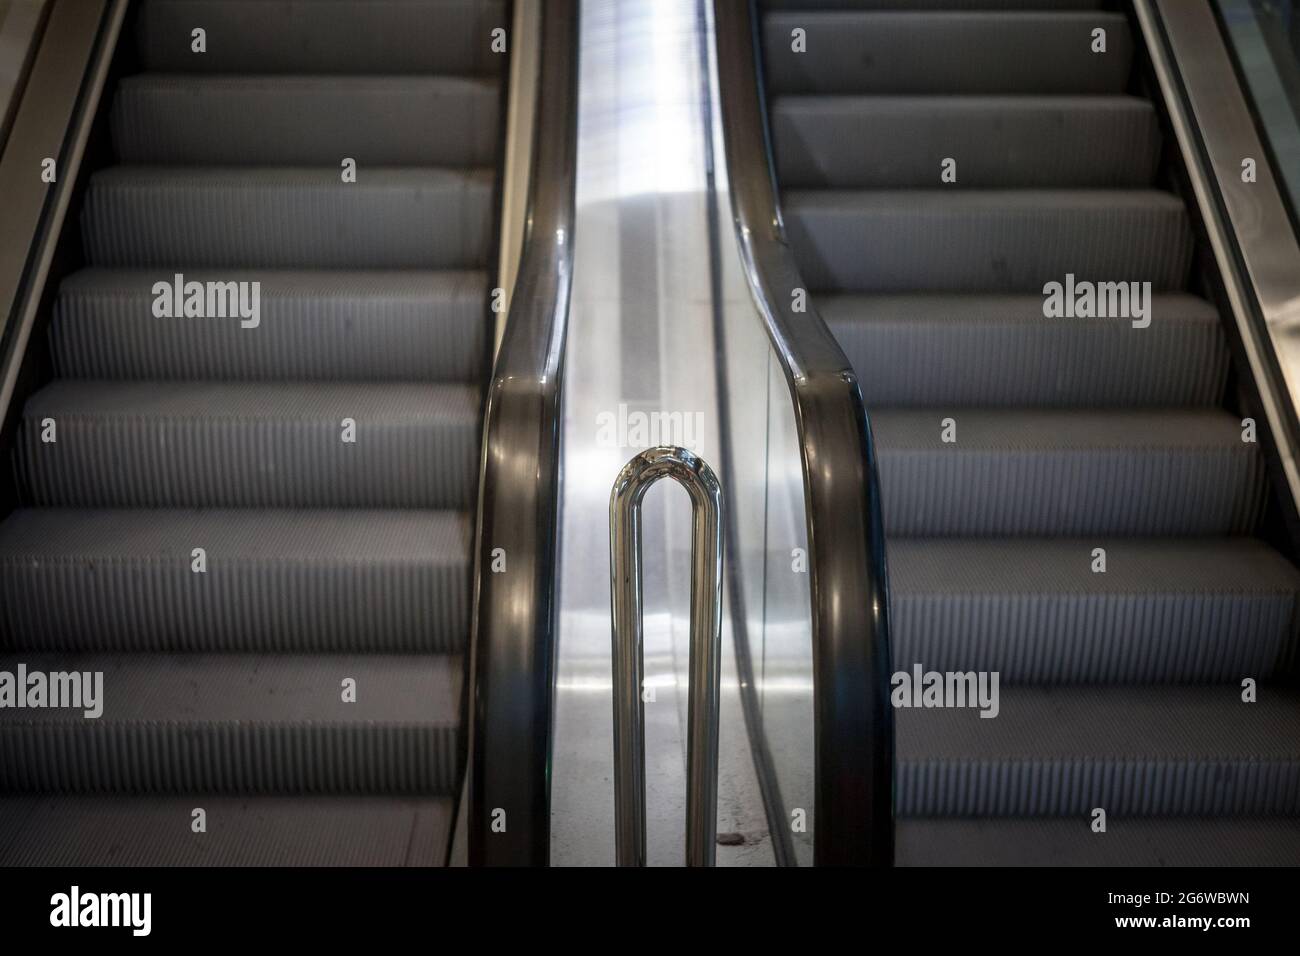 Picture of mecanical stairs, or escalators, in movementm without people, in a train station connecting the underground corridor and platforms Stock Photo